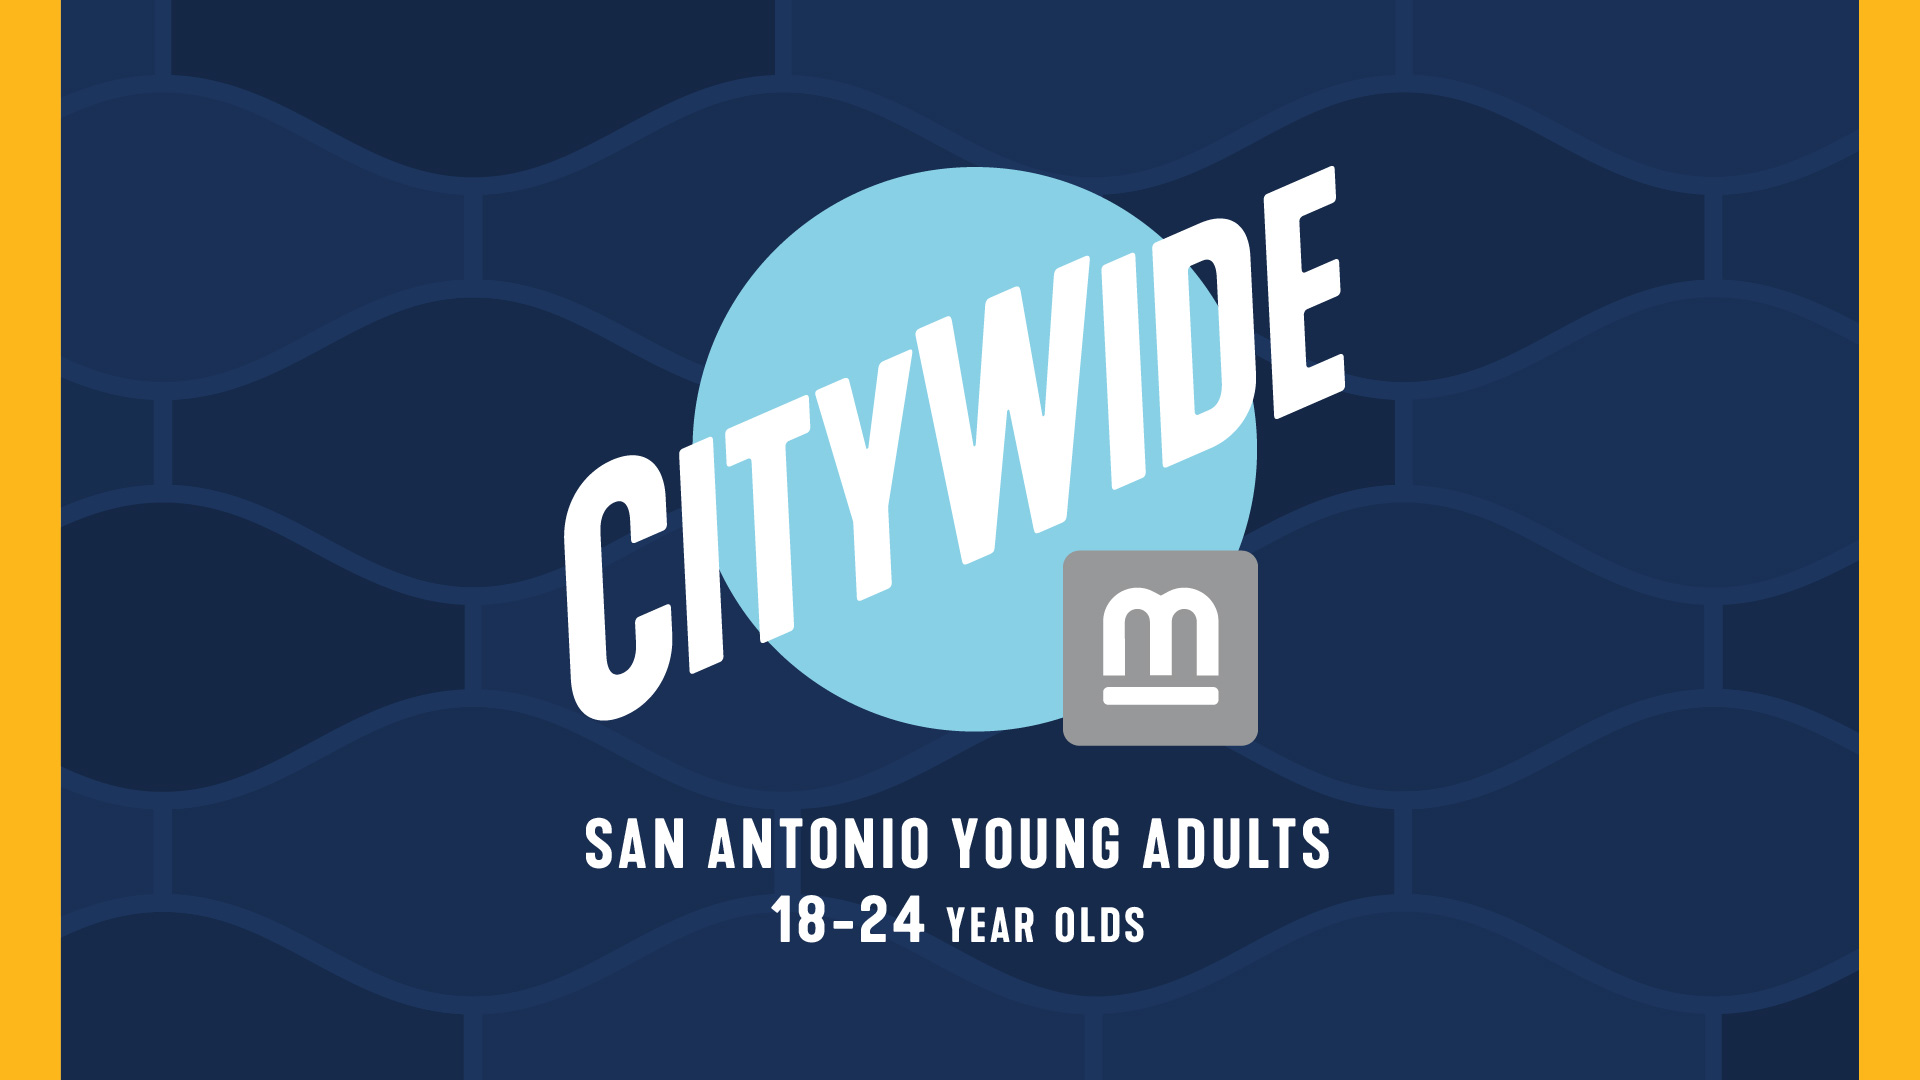 Citywide College Age Young Adult Gathering in San Antonio